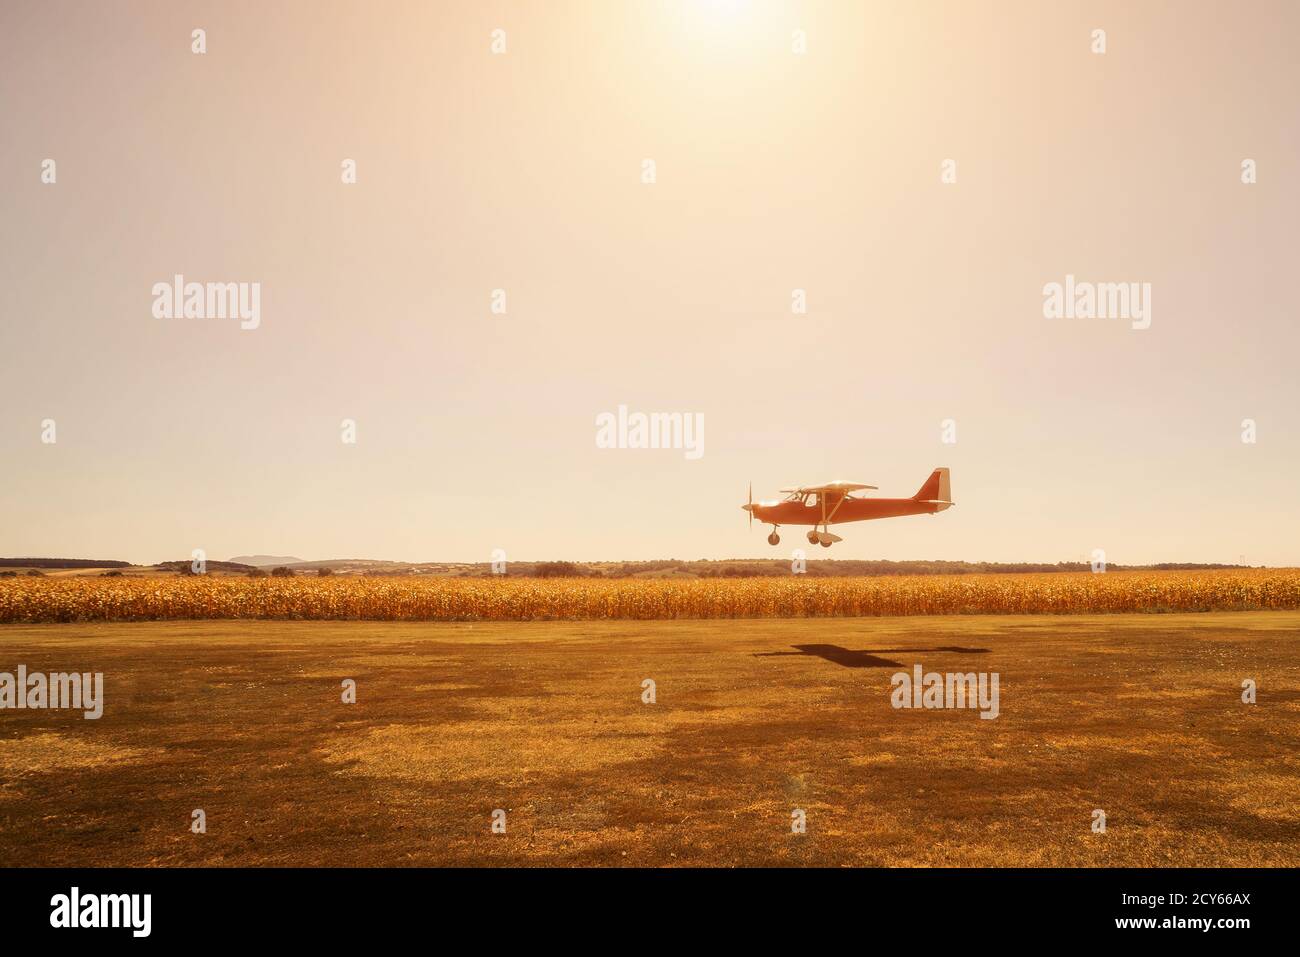 Small red plane in low pass over airstrip Stock Photo